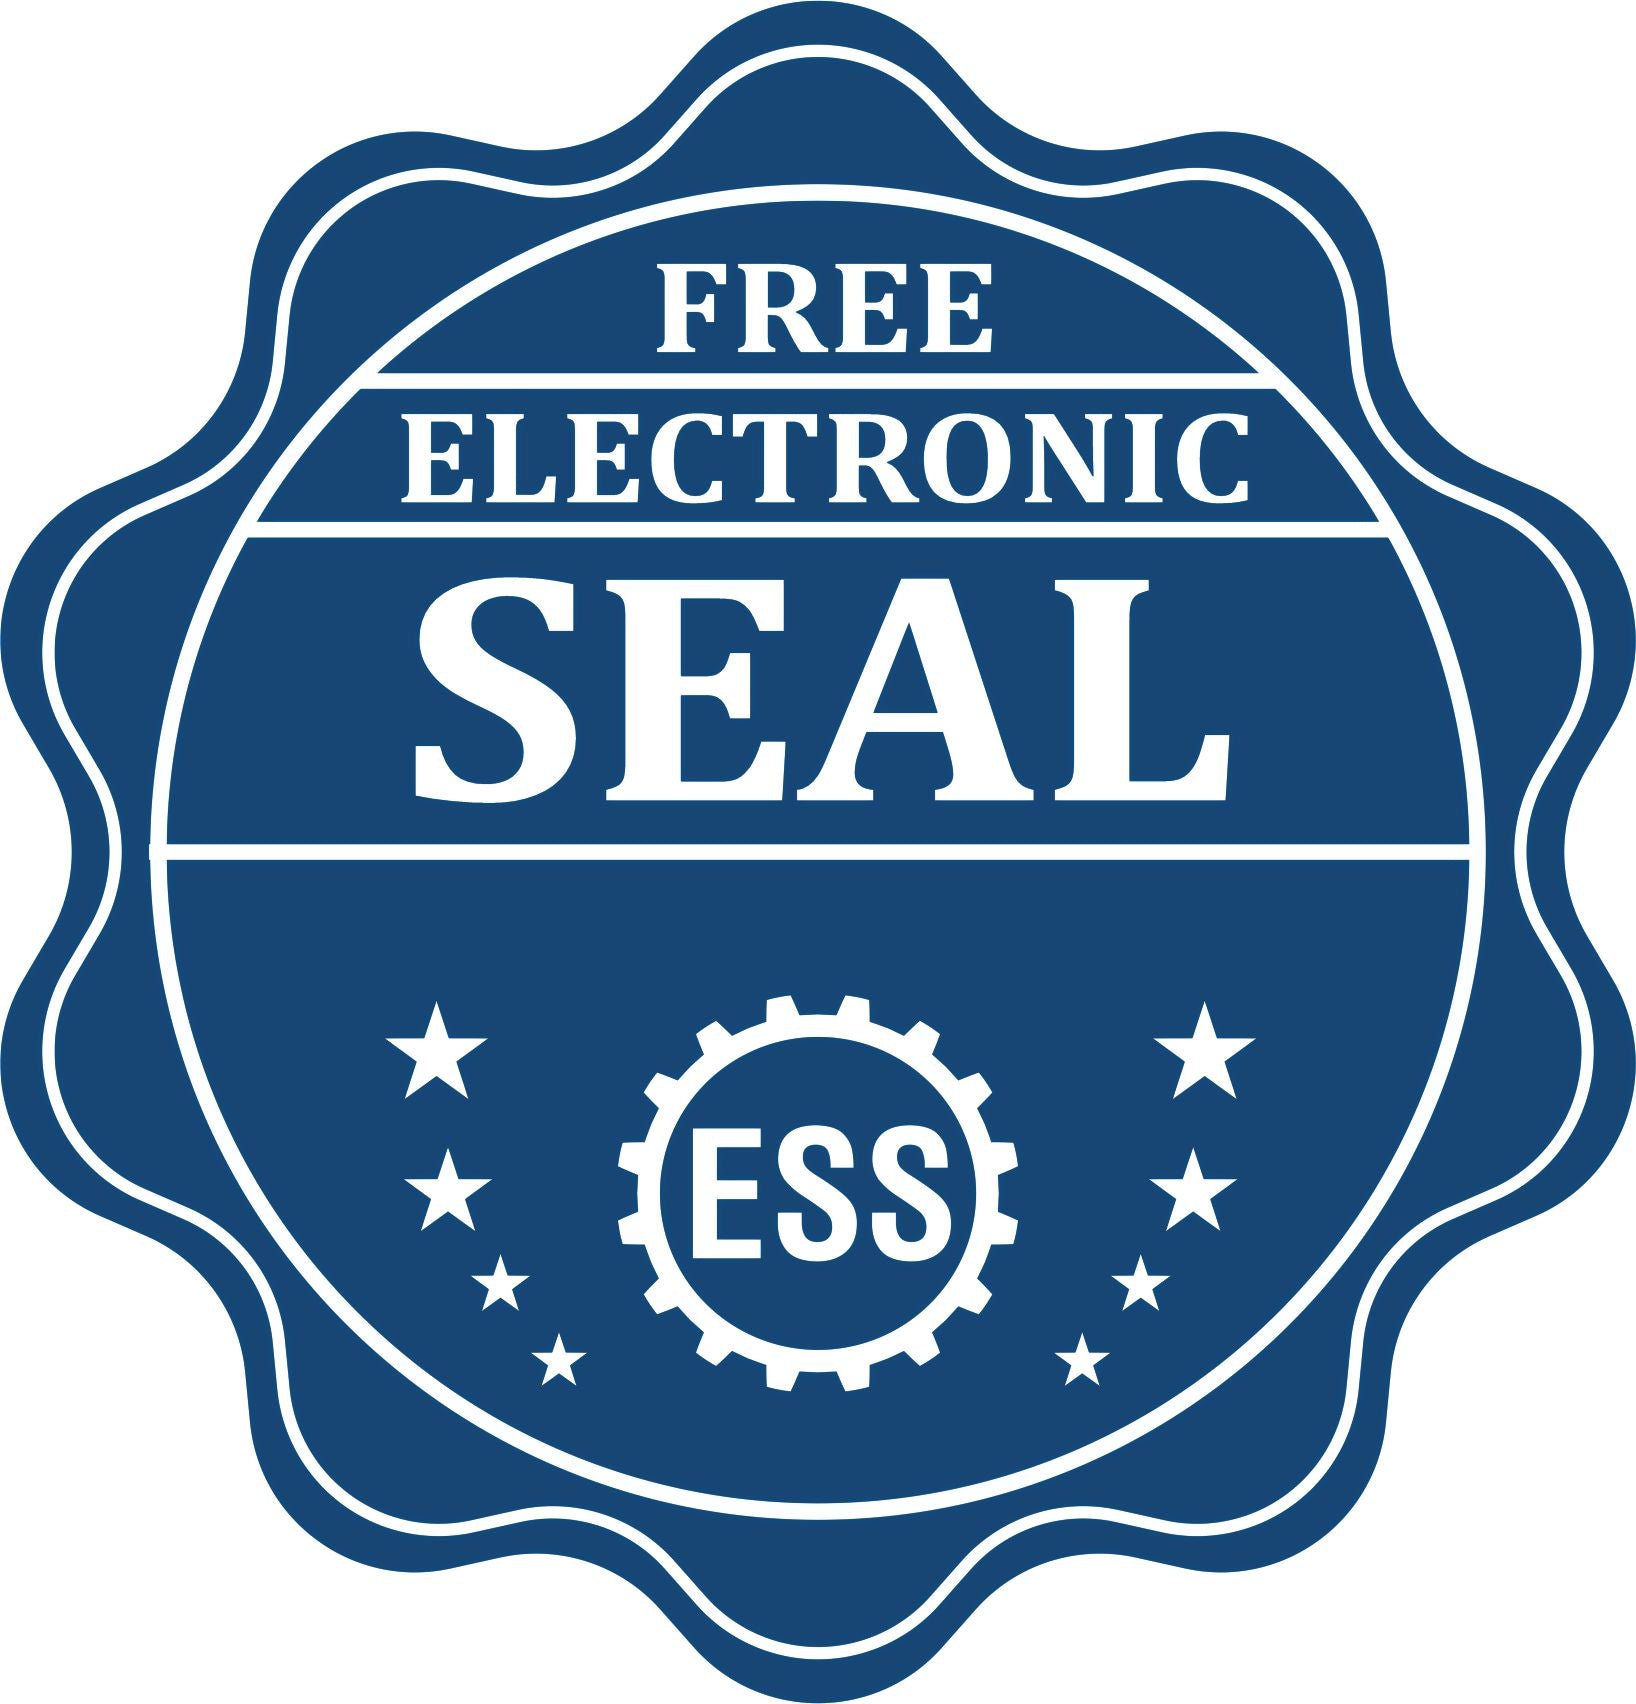 A badge showing a free electronic seal for the Self-Inking West Virginia Landscape Architect Stamp with stars and the ESS gear on the emblem.